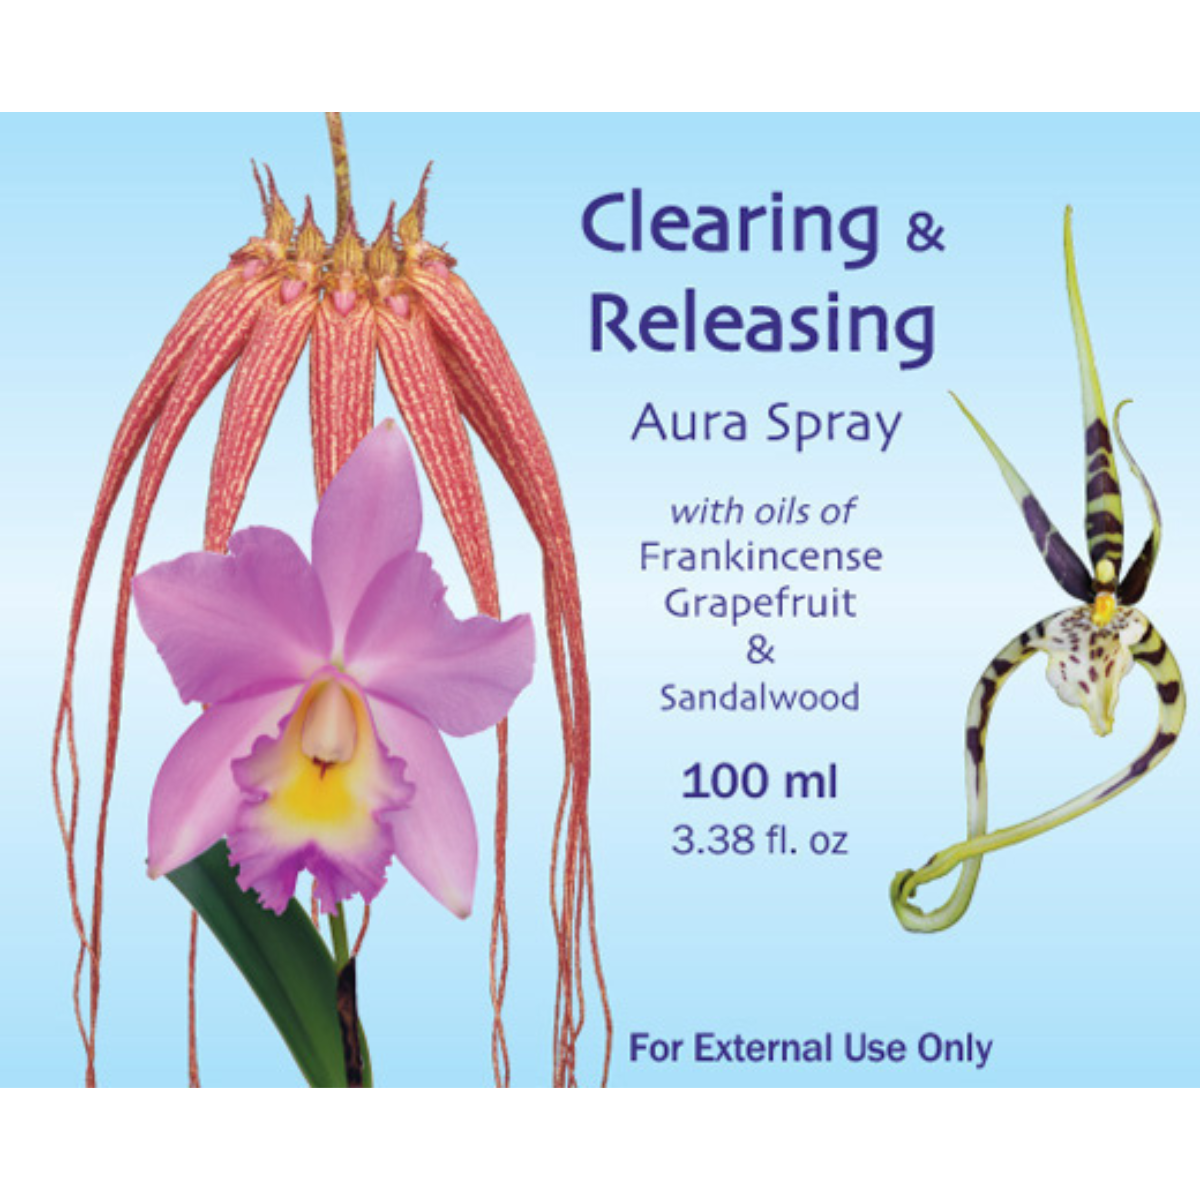 Clearing & Releasing Aura Spray